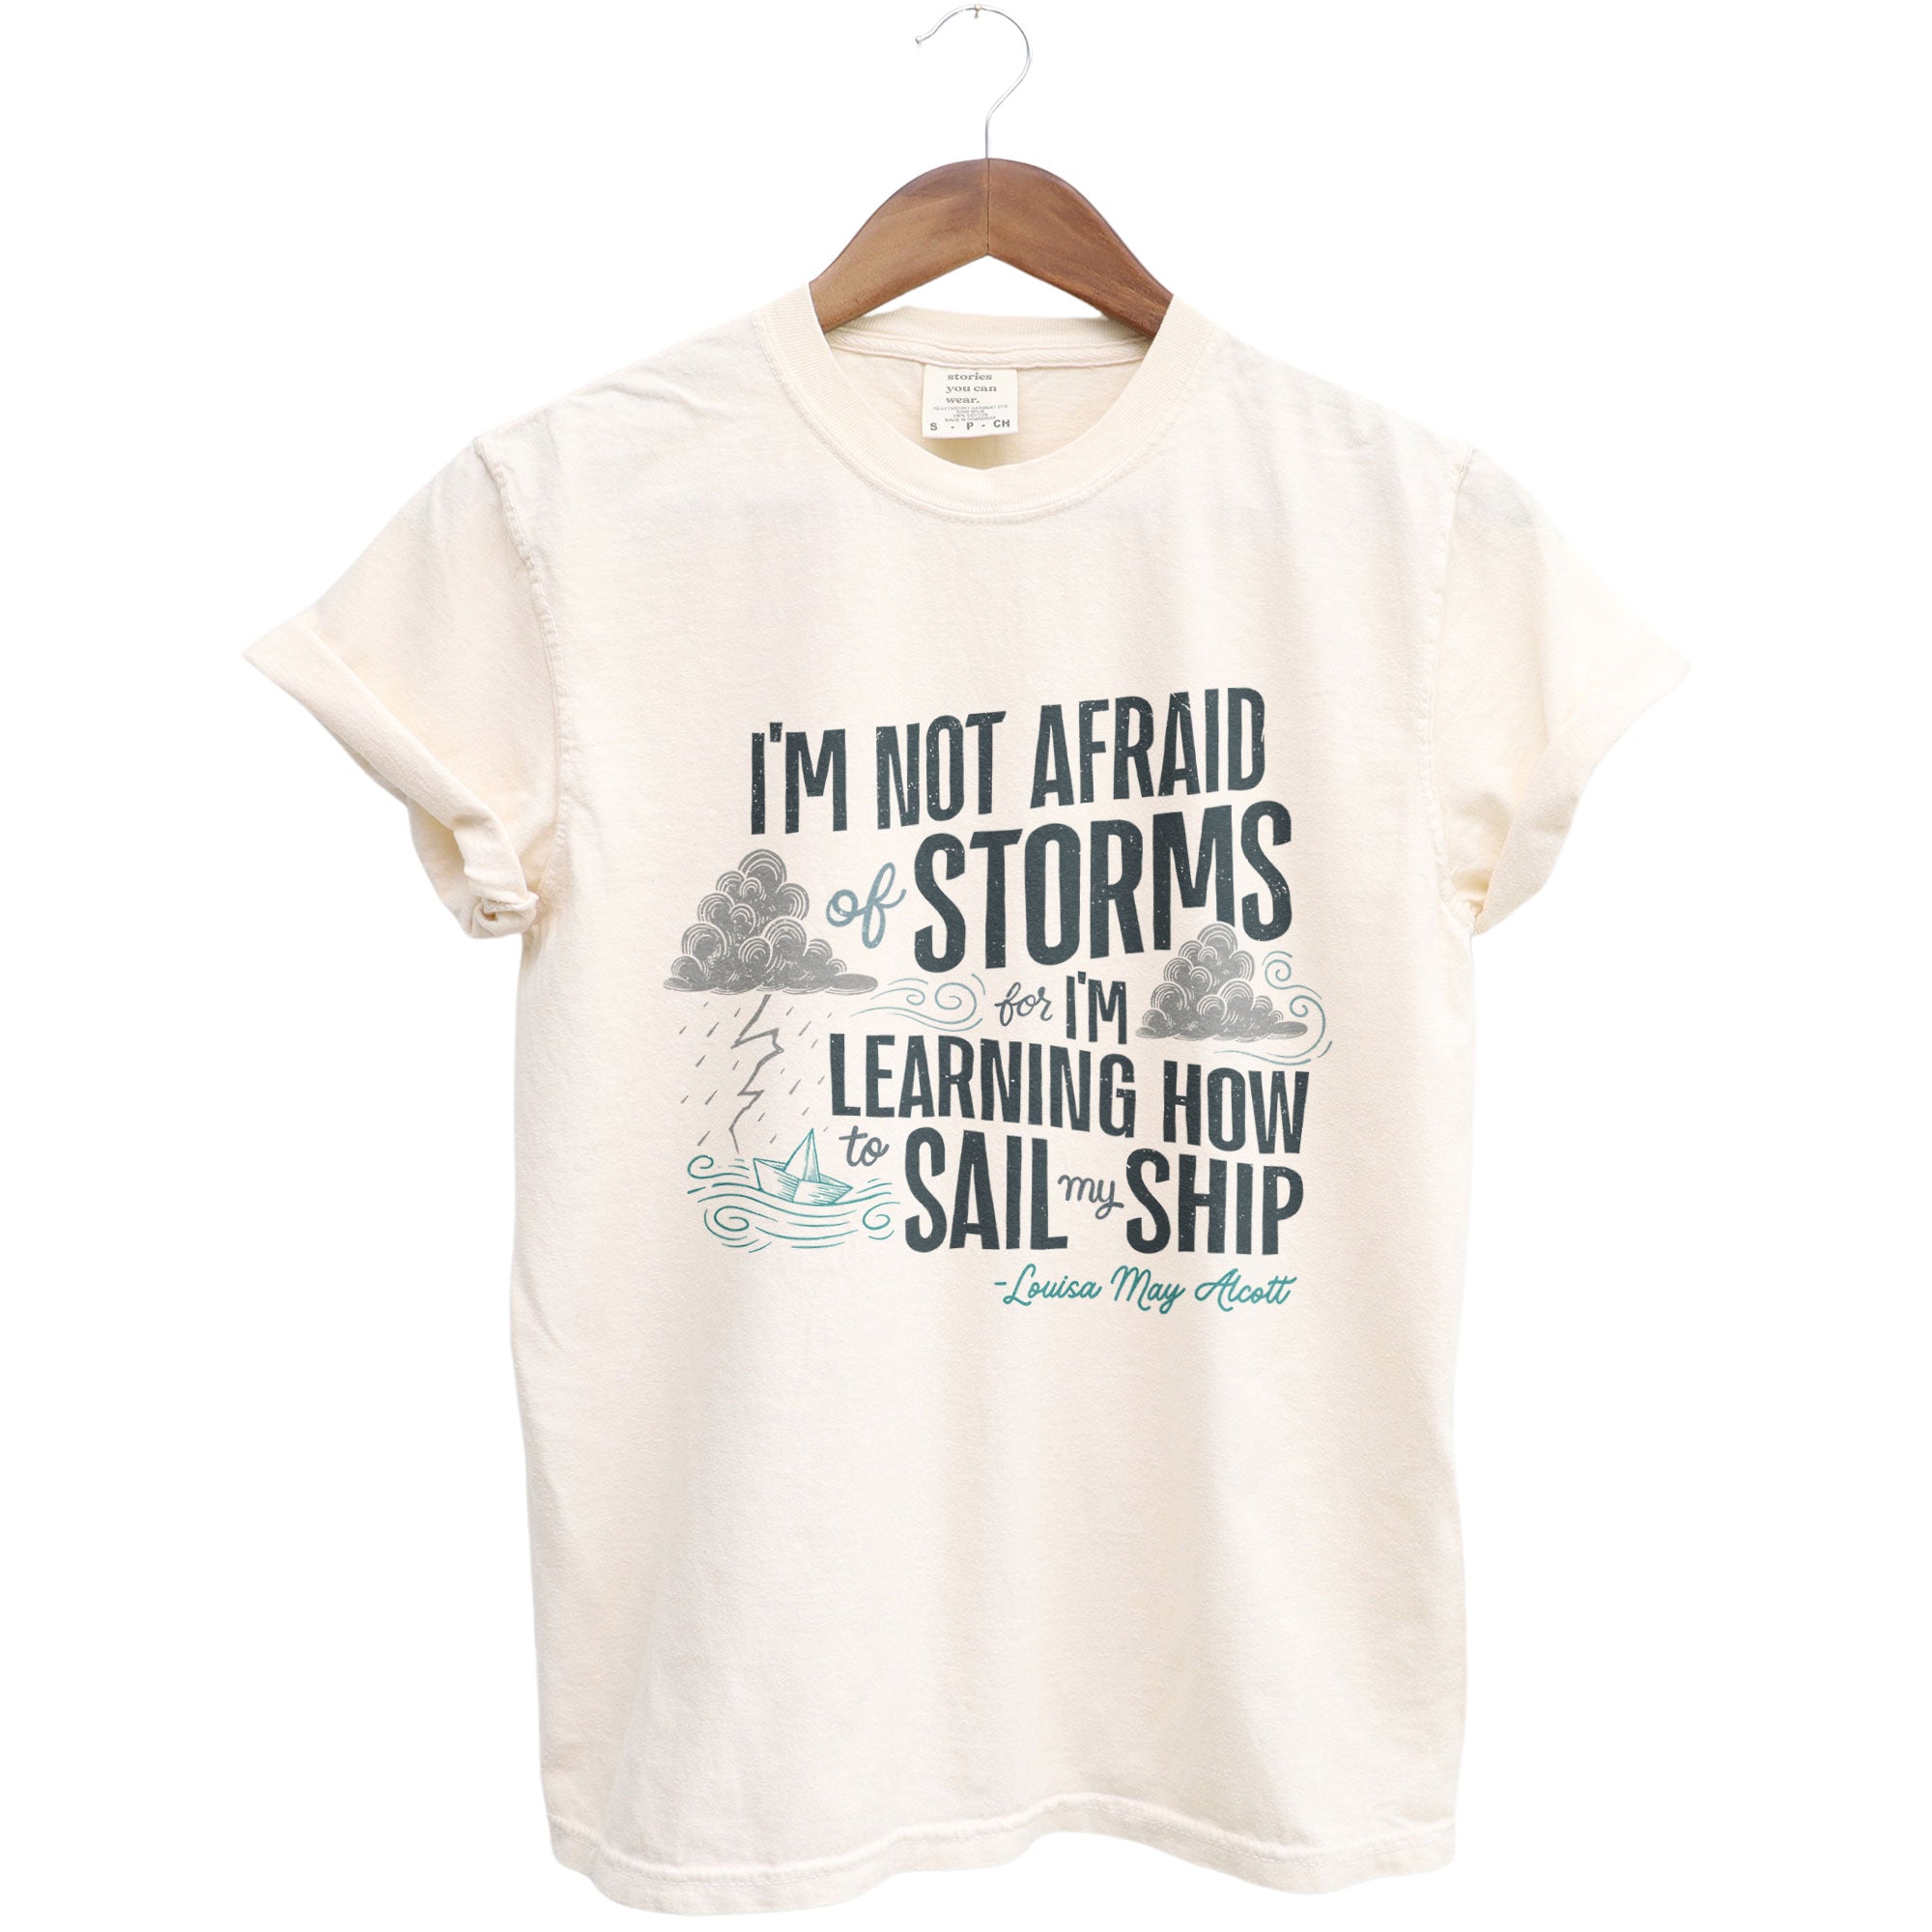 I'm Not Afraid of Storms Garment-Dyed Tee